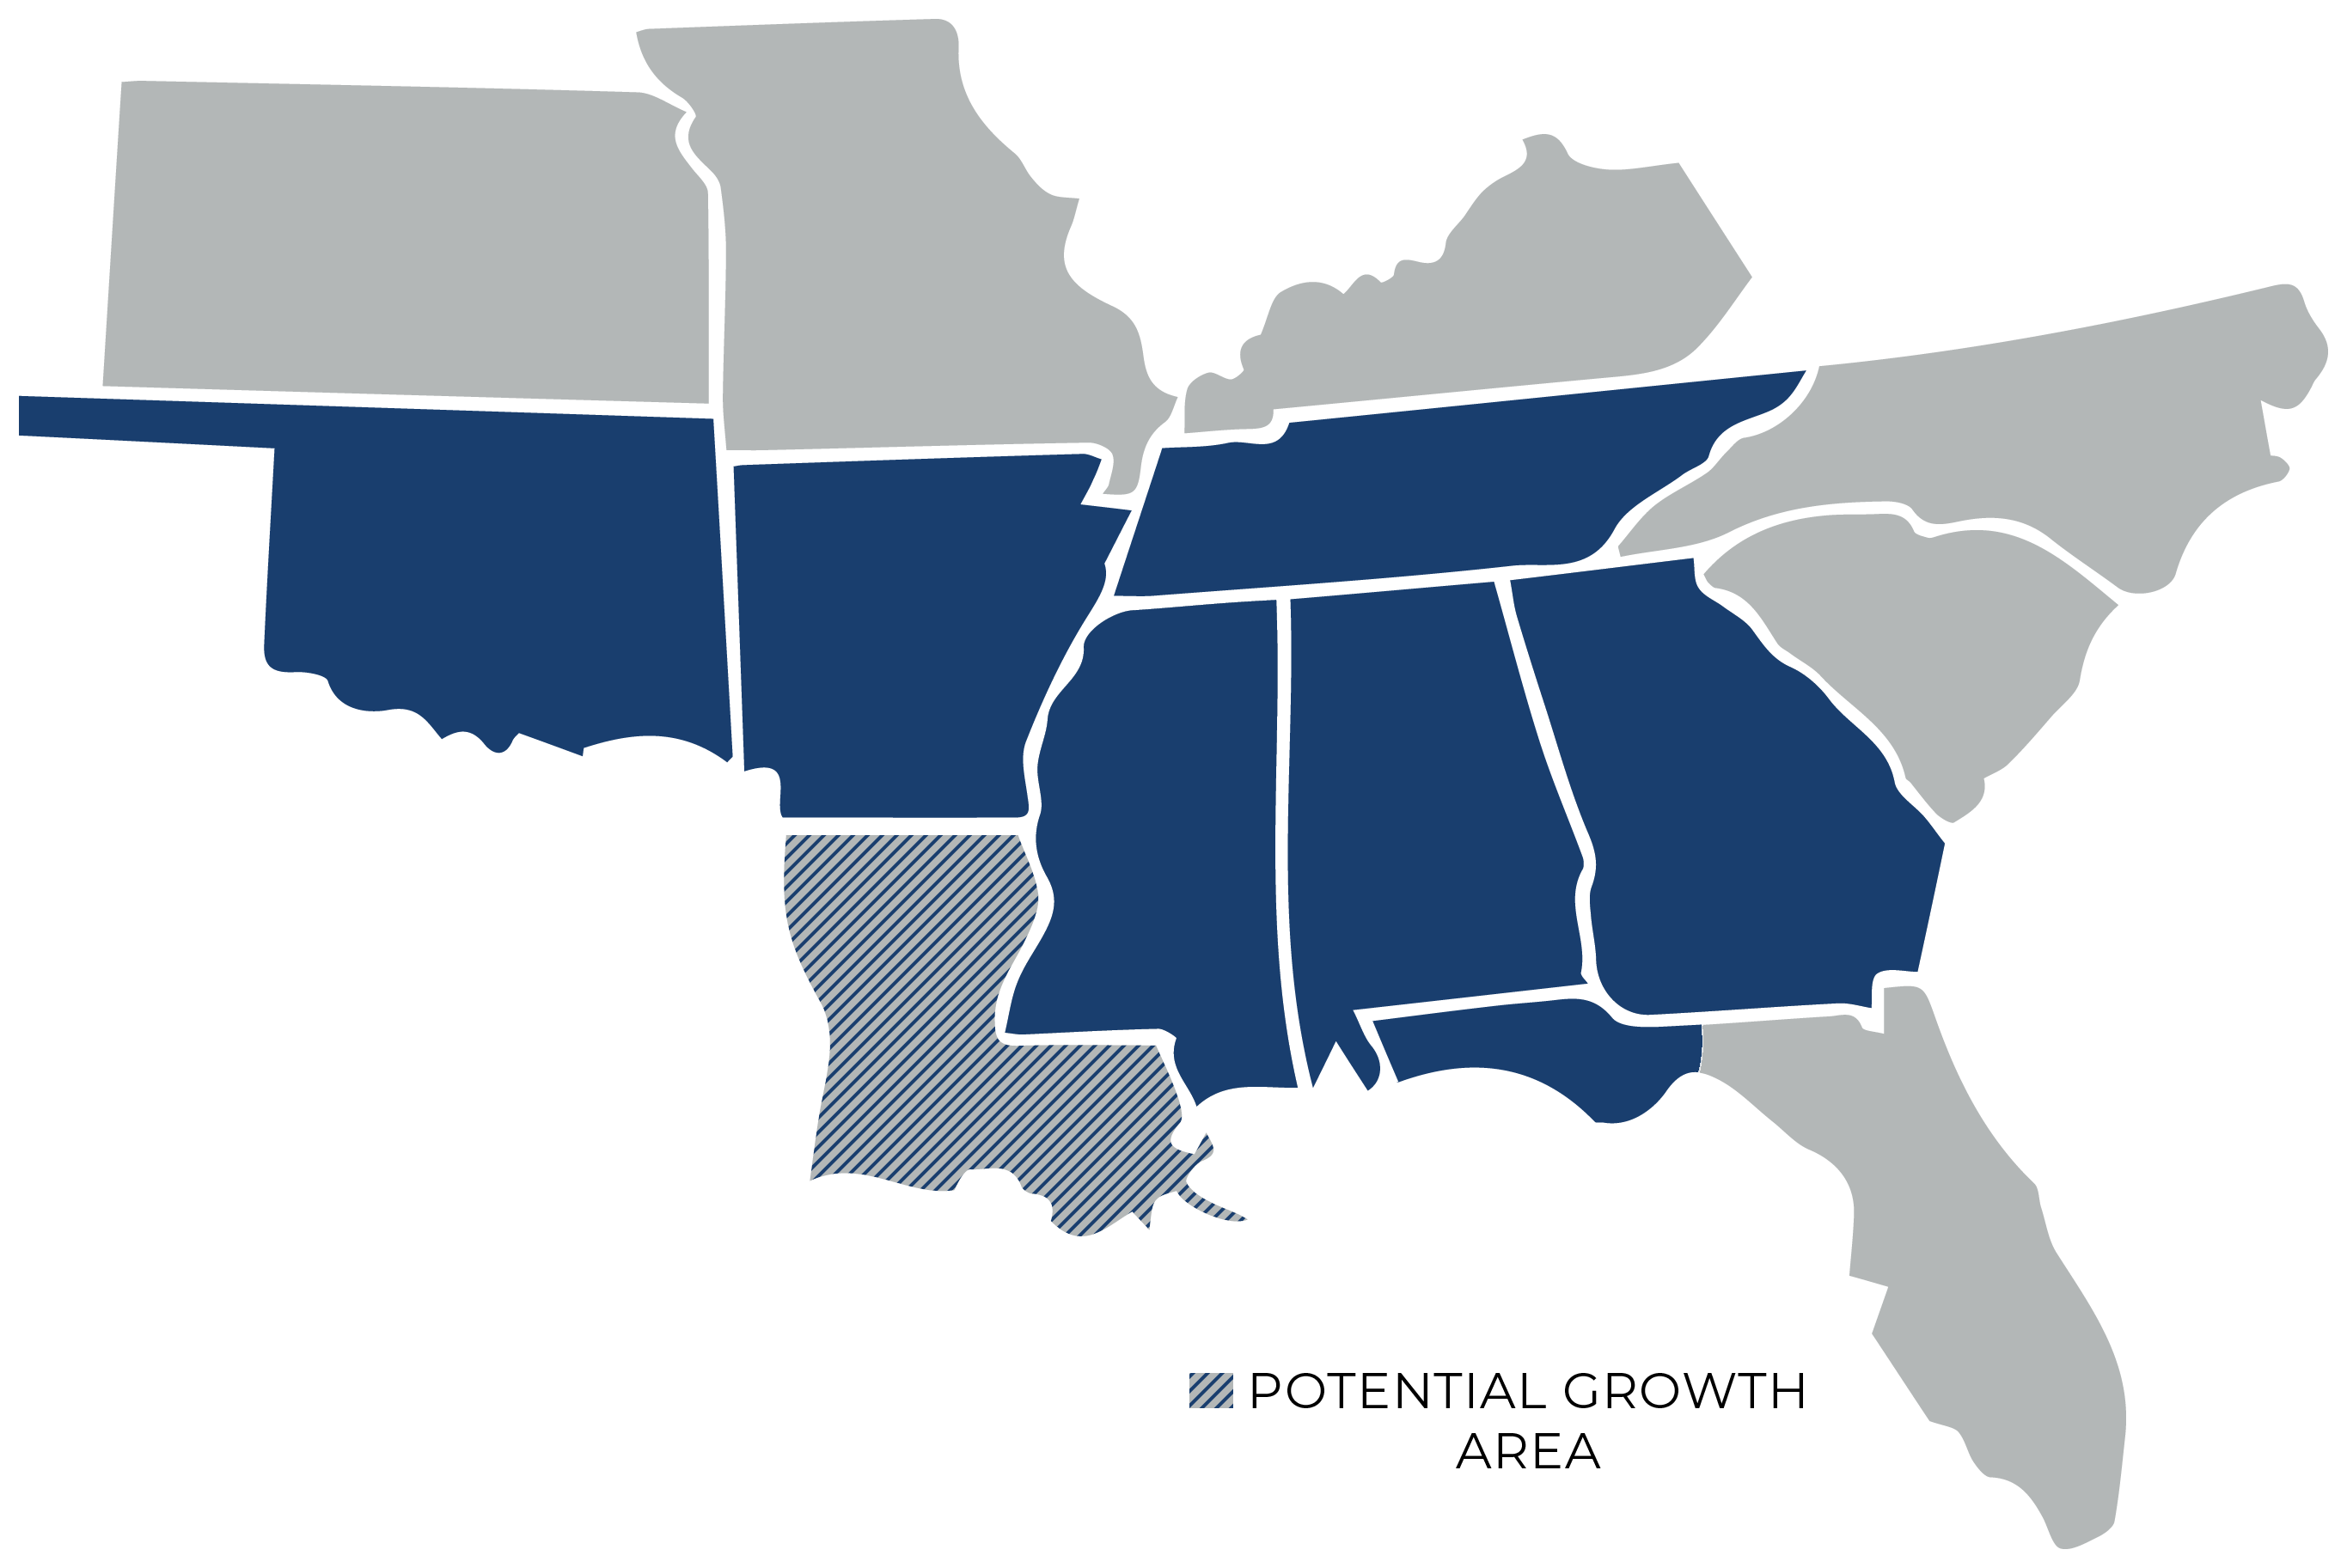 Deerman Sales is currently servicing Oklahoma, Arkansas, Tennessee, Mississippi, Alabama, Georgia, and the Florida Panhandle.